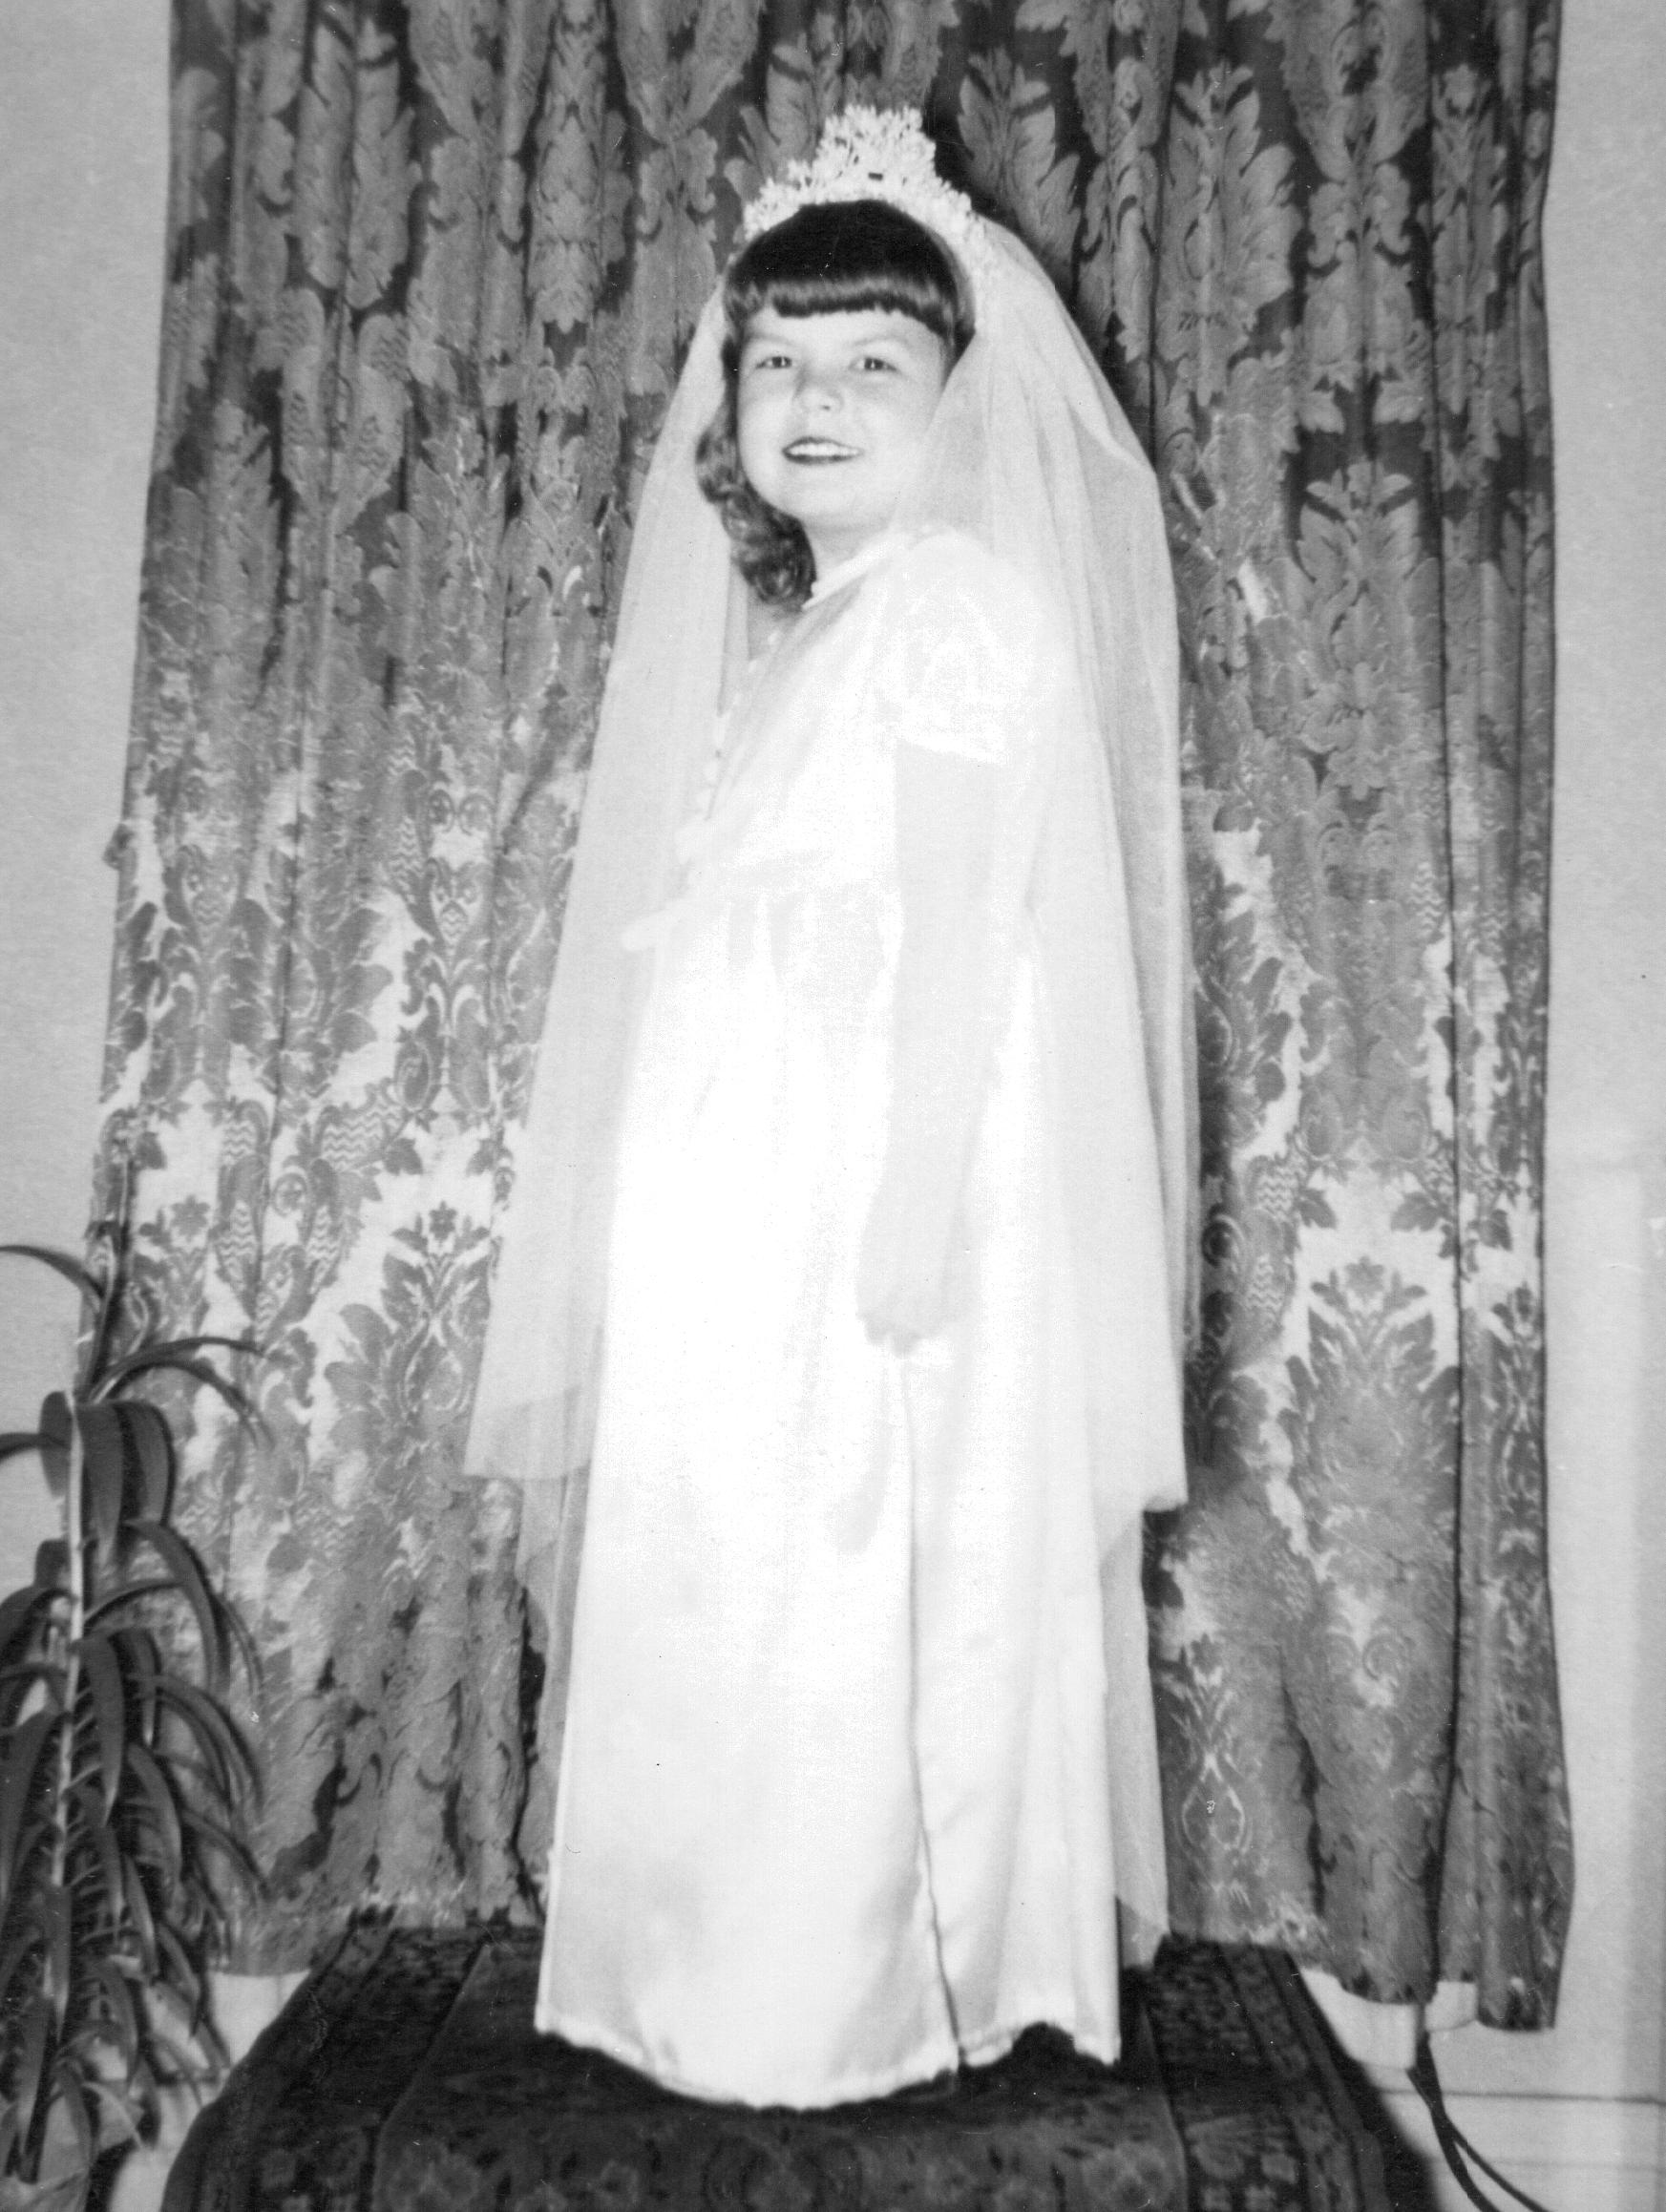 A young person in a wedding dress